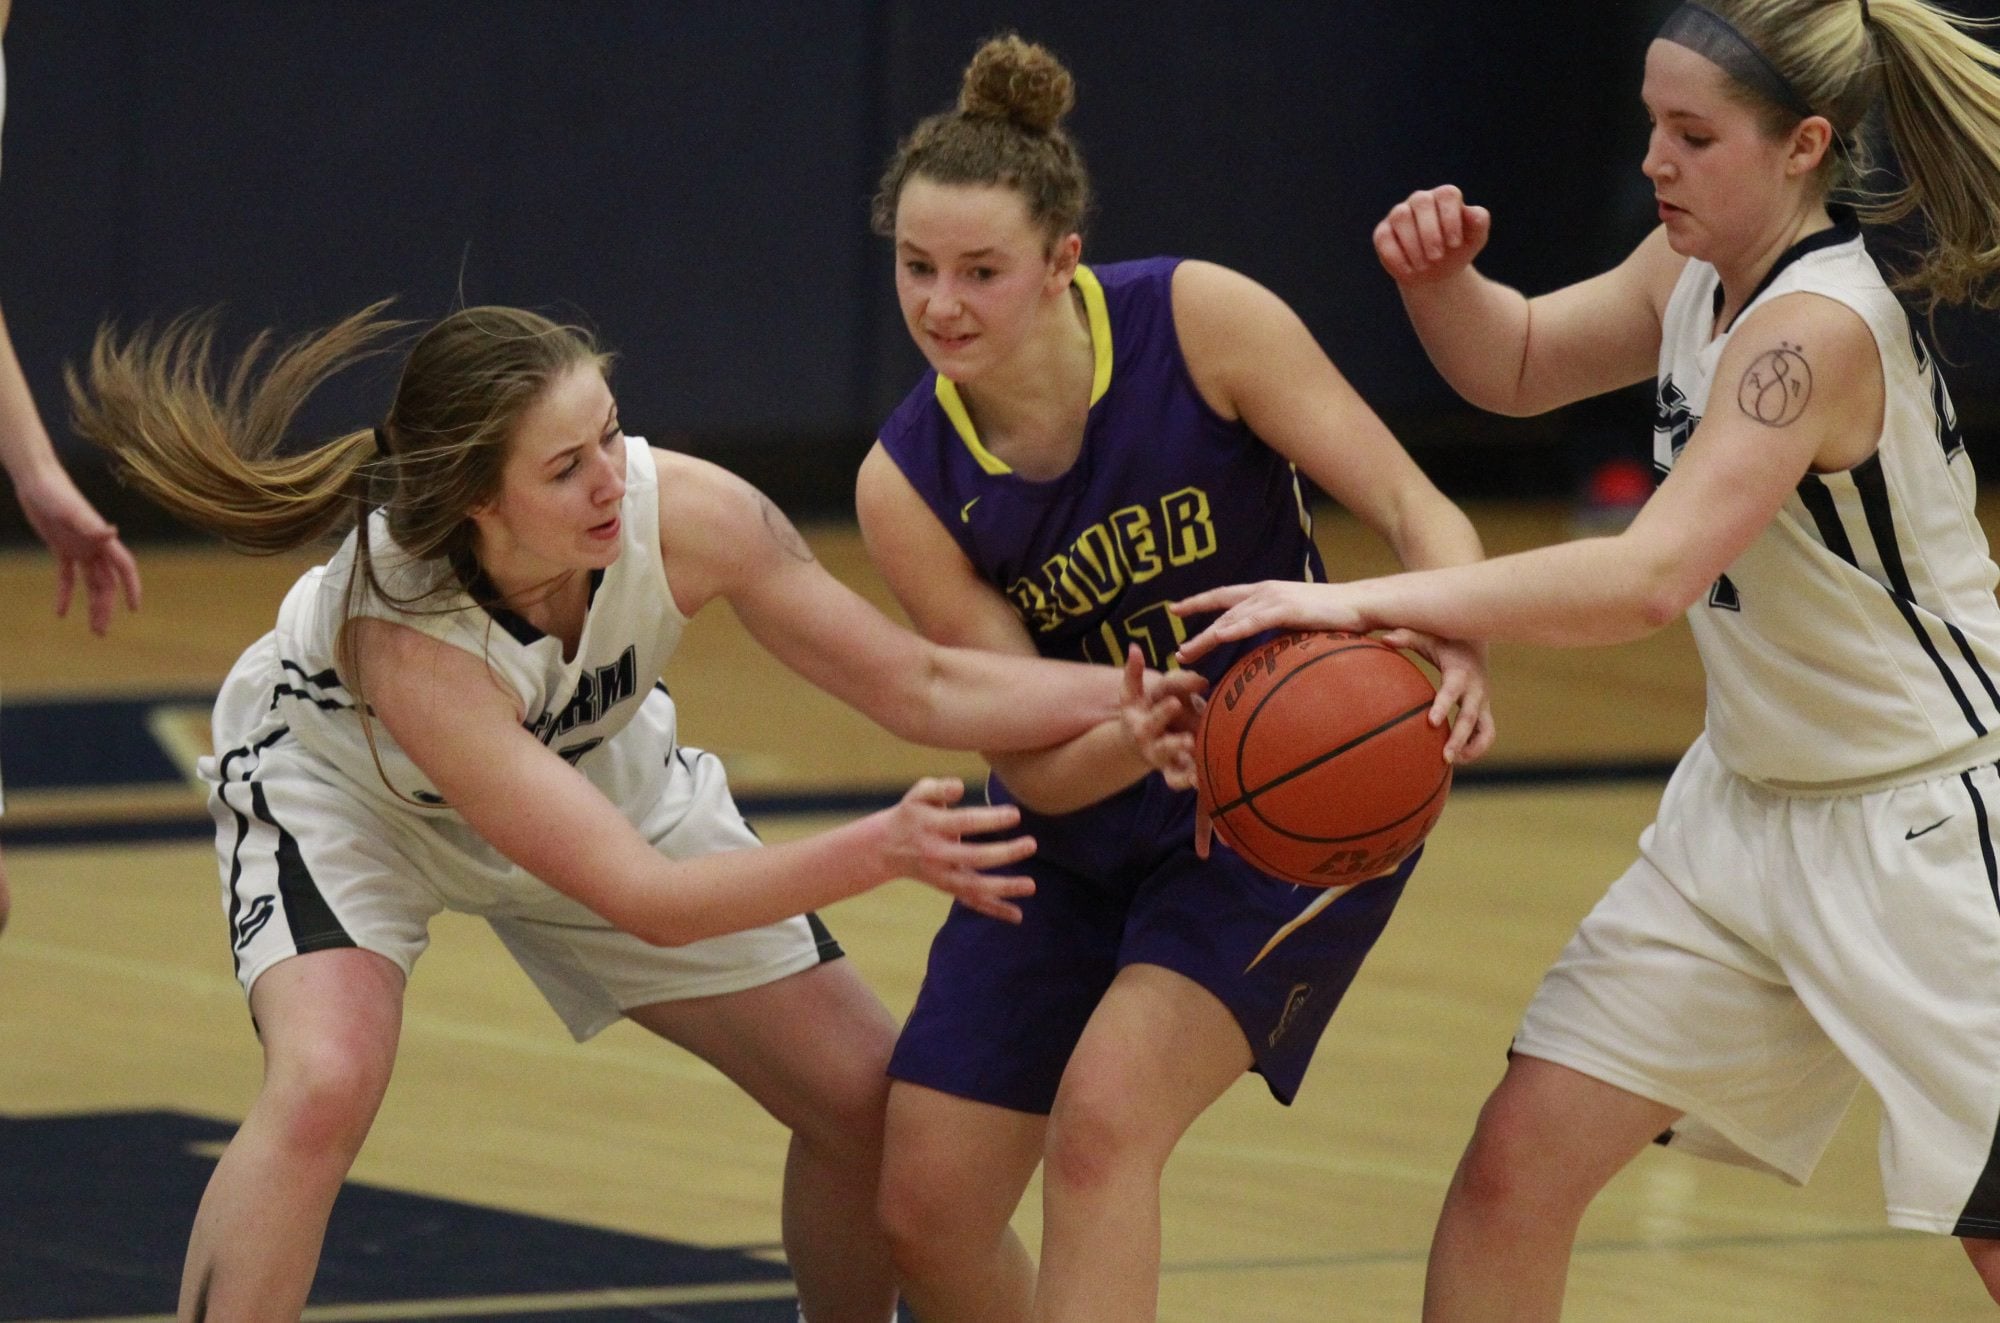 Kate Kraft (center) of Columbia River tries to hold on to the ball as Ashlee Comastro (left) and Kirsten Johnson (right) of Skyview defend.